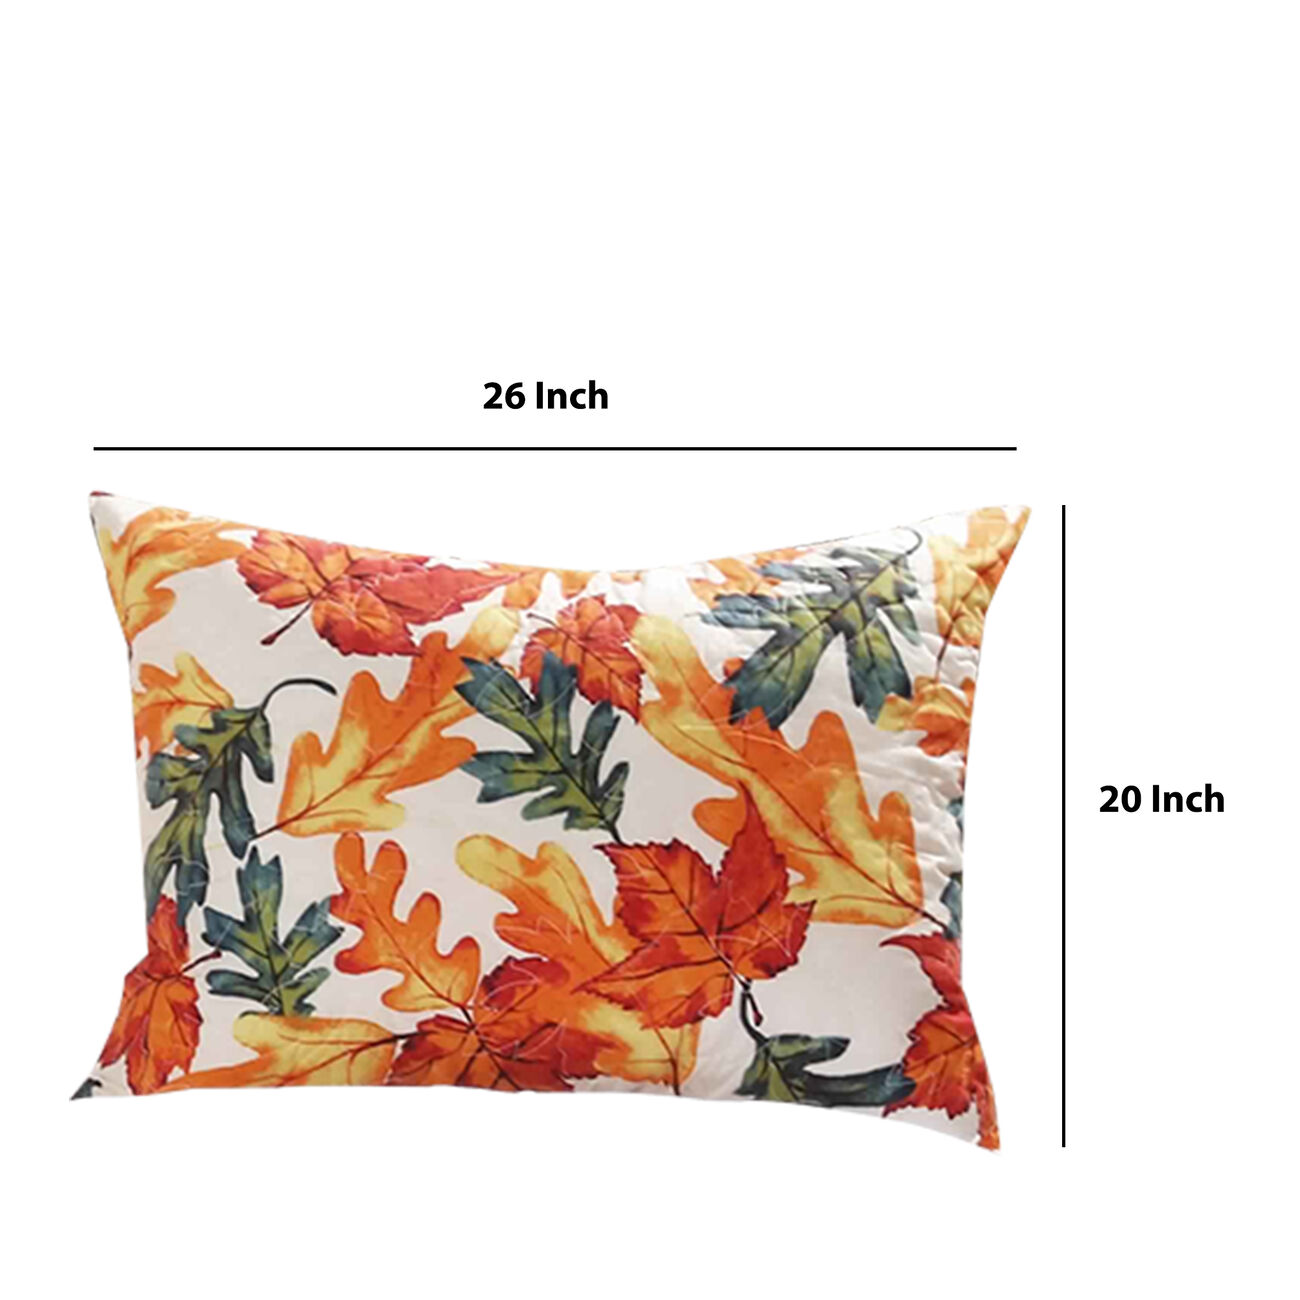 20 X 26 Autumn Floral Print Pillow Sham with Polyester Filling, Multicolor